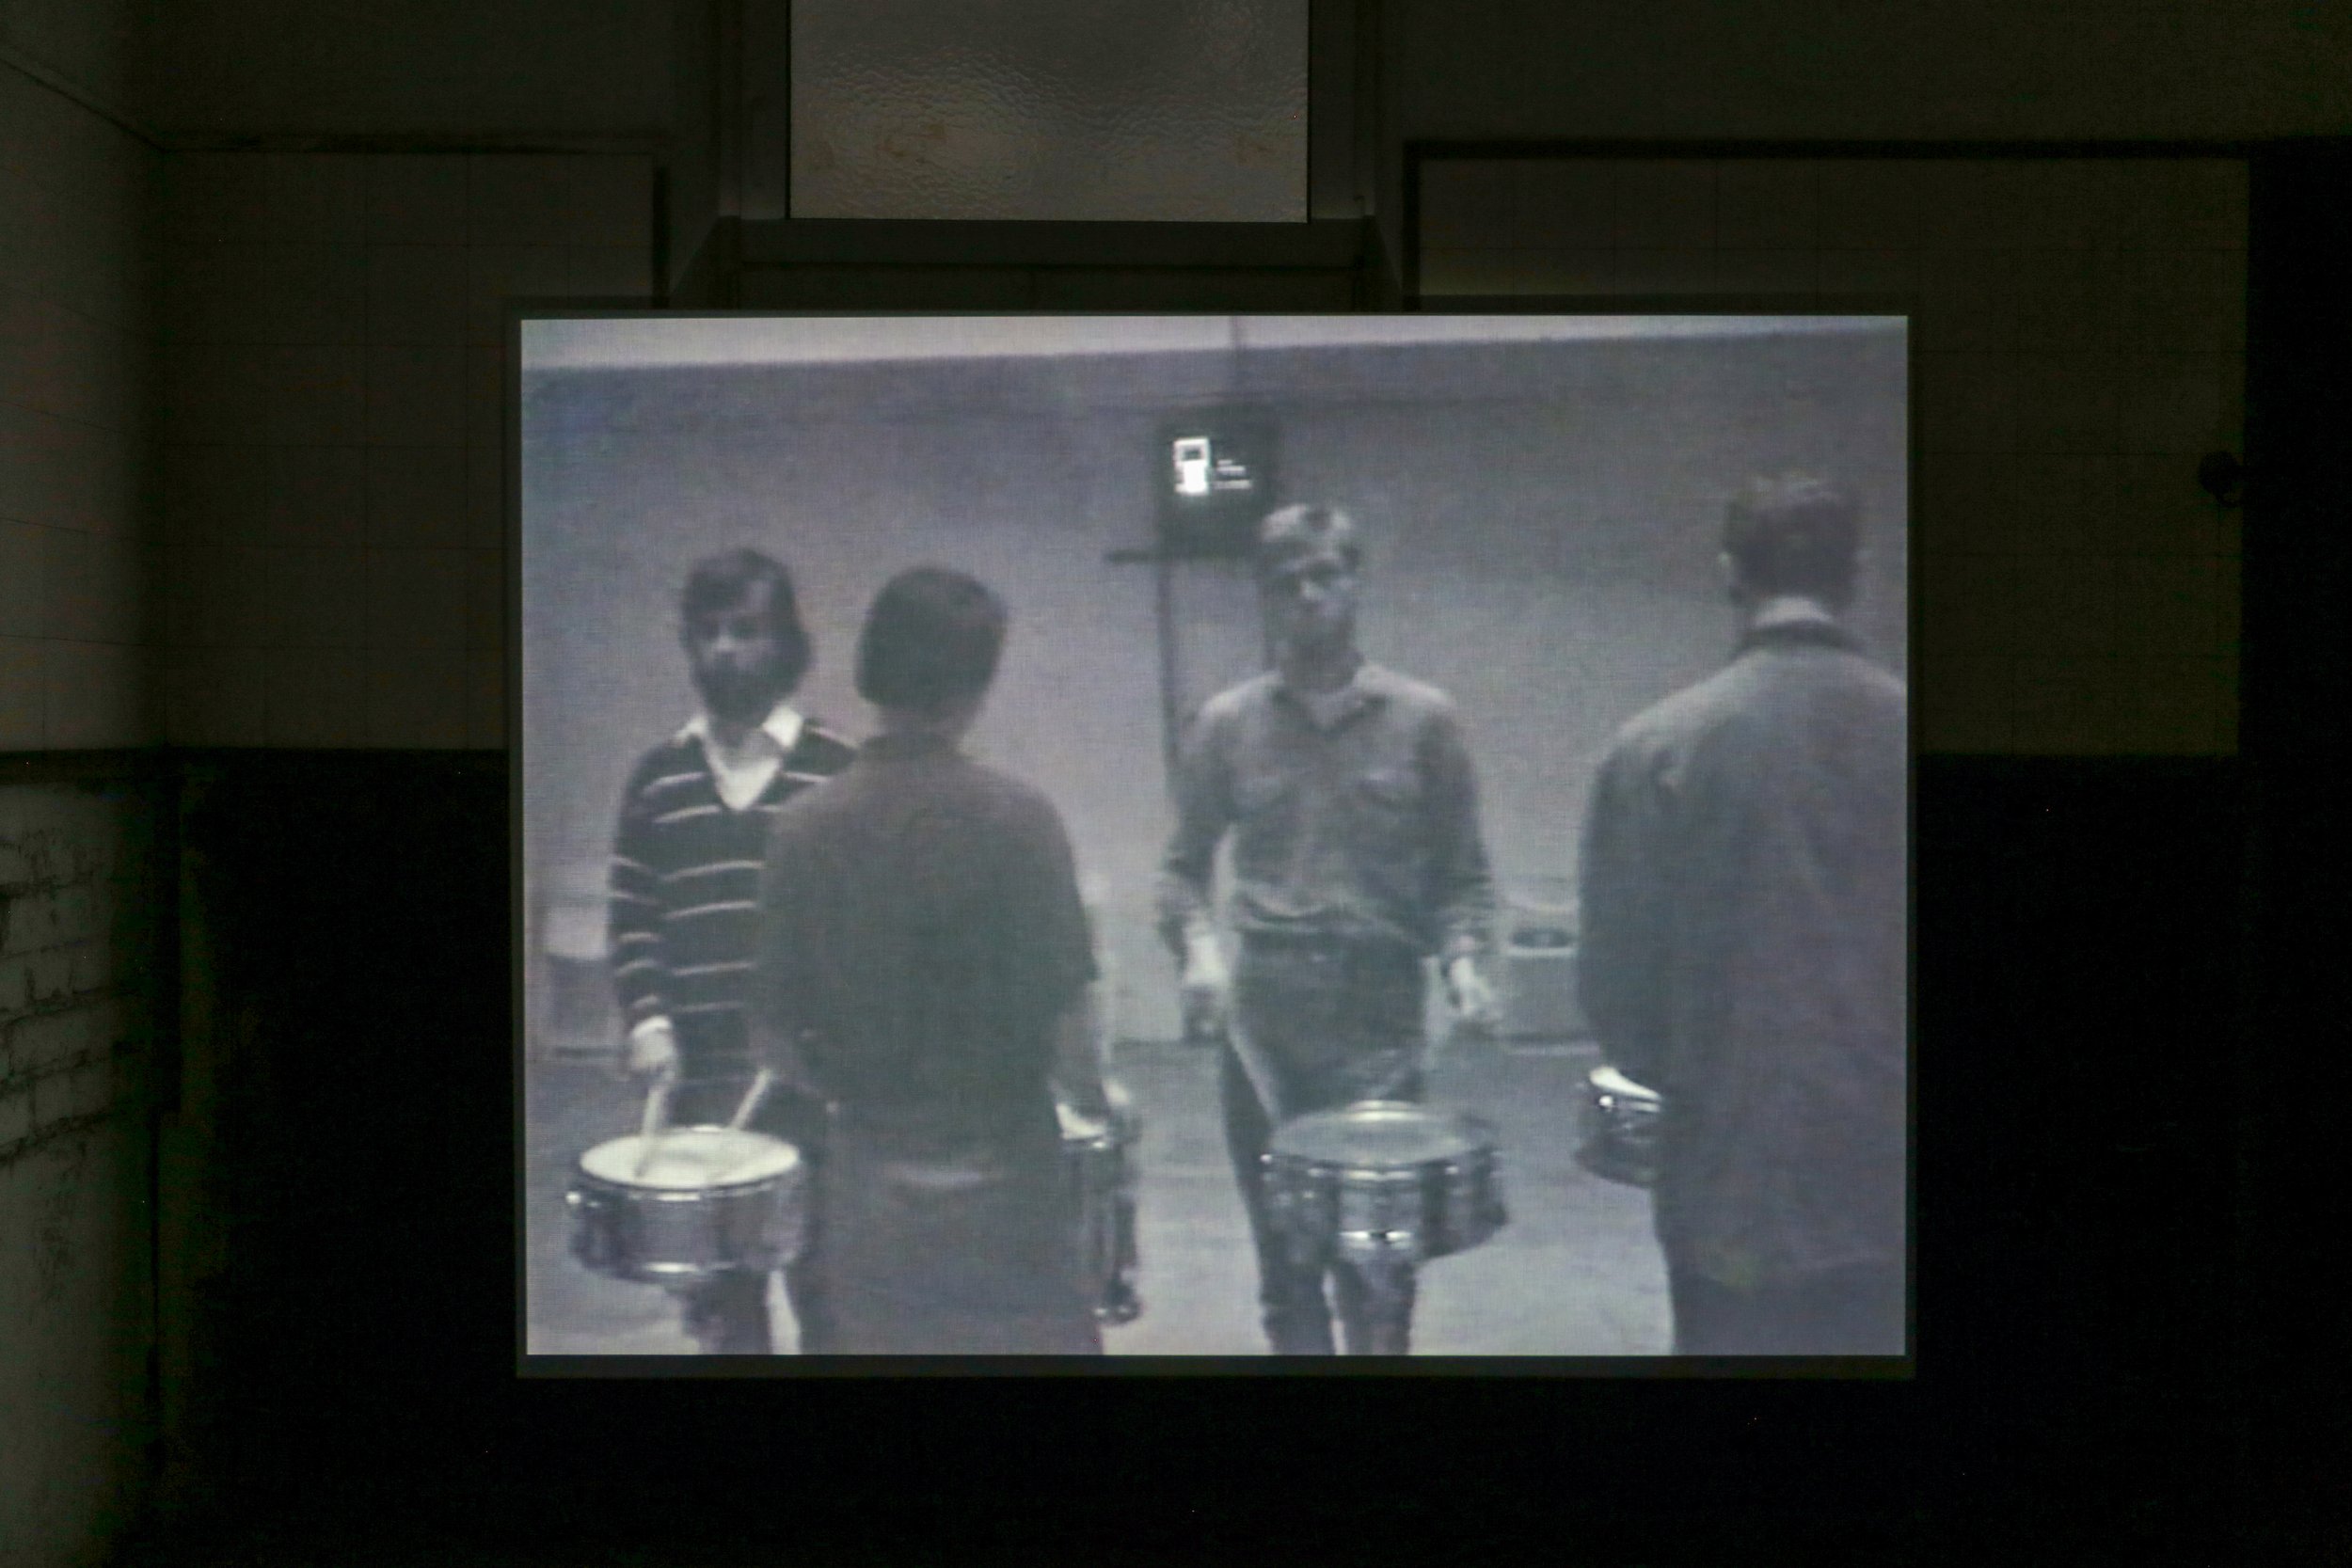   fig13 installation view Toine Horvers, Rolling, 1986 , 00:15:53., In collections: De Appel, LIMA  